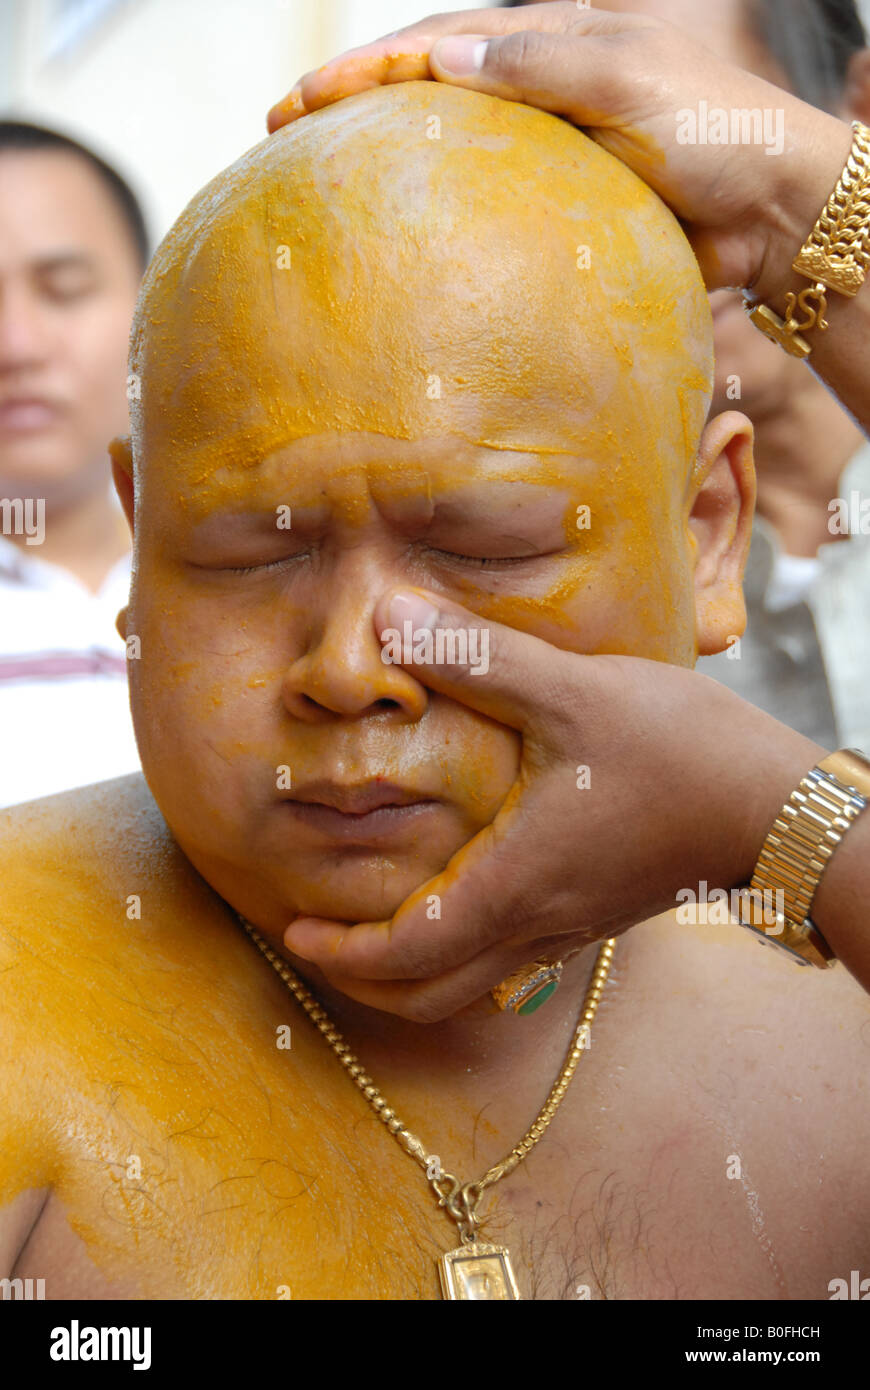 relative apply turmeric all over the man's face before buddhist ordination ritual Stock Photo